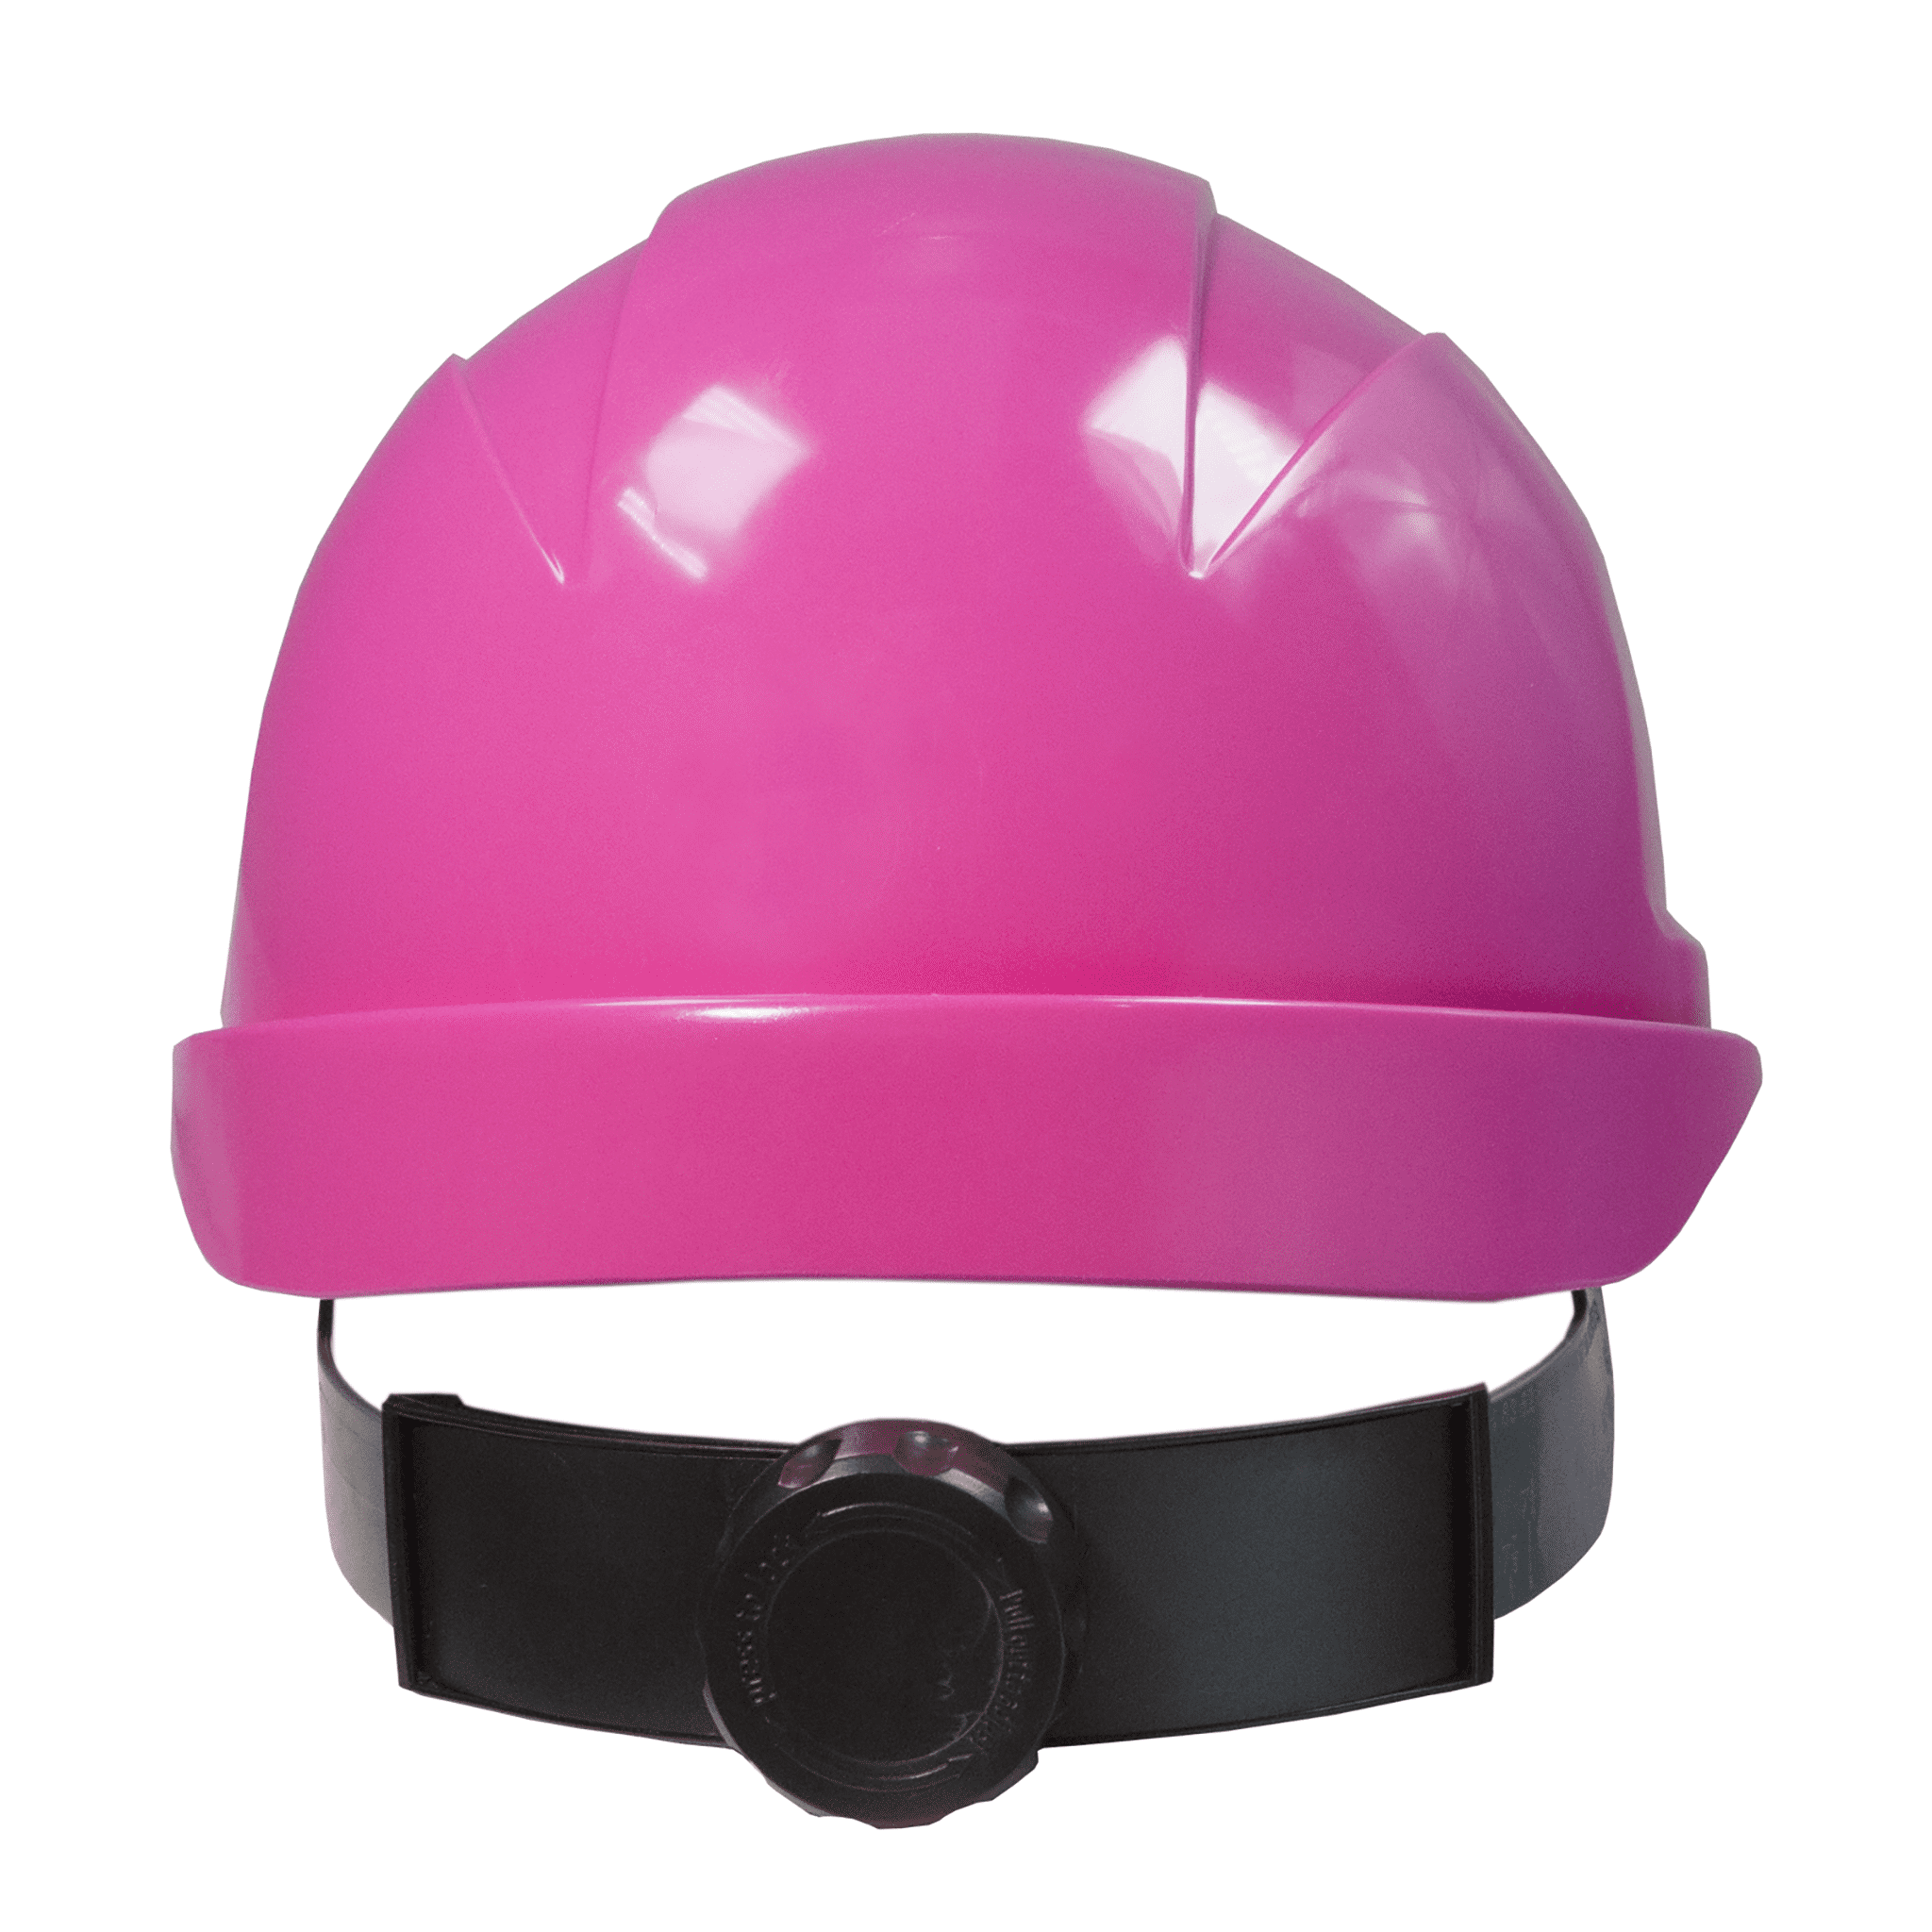 HDPE Cap Style Hard Hat Helmet w/Adjustable Ratchet Suspension For Work Lime Home and General Headwear Protection ANSI Z89.1-14 Compliant PPE By JORESTECH Hi Vis 